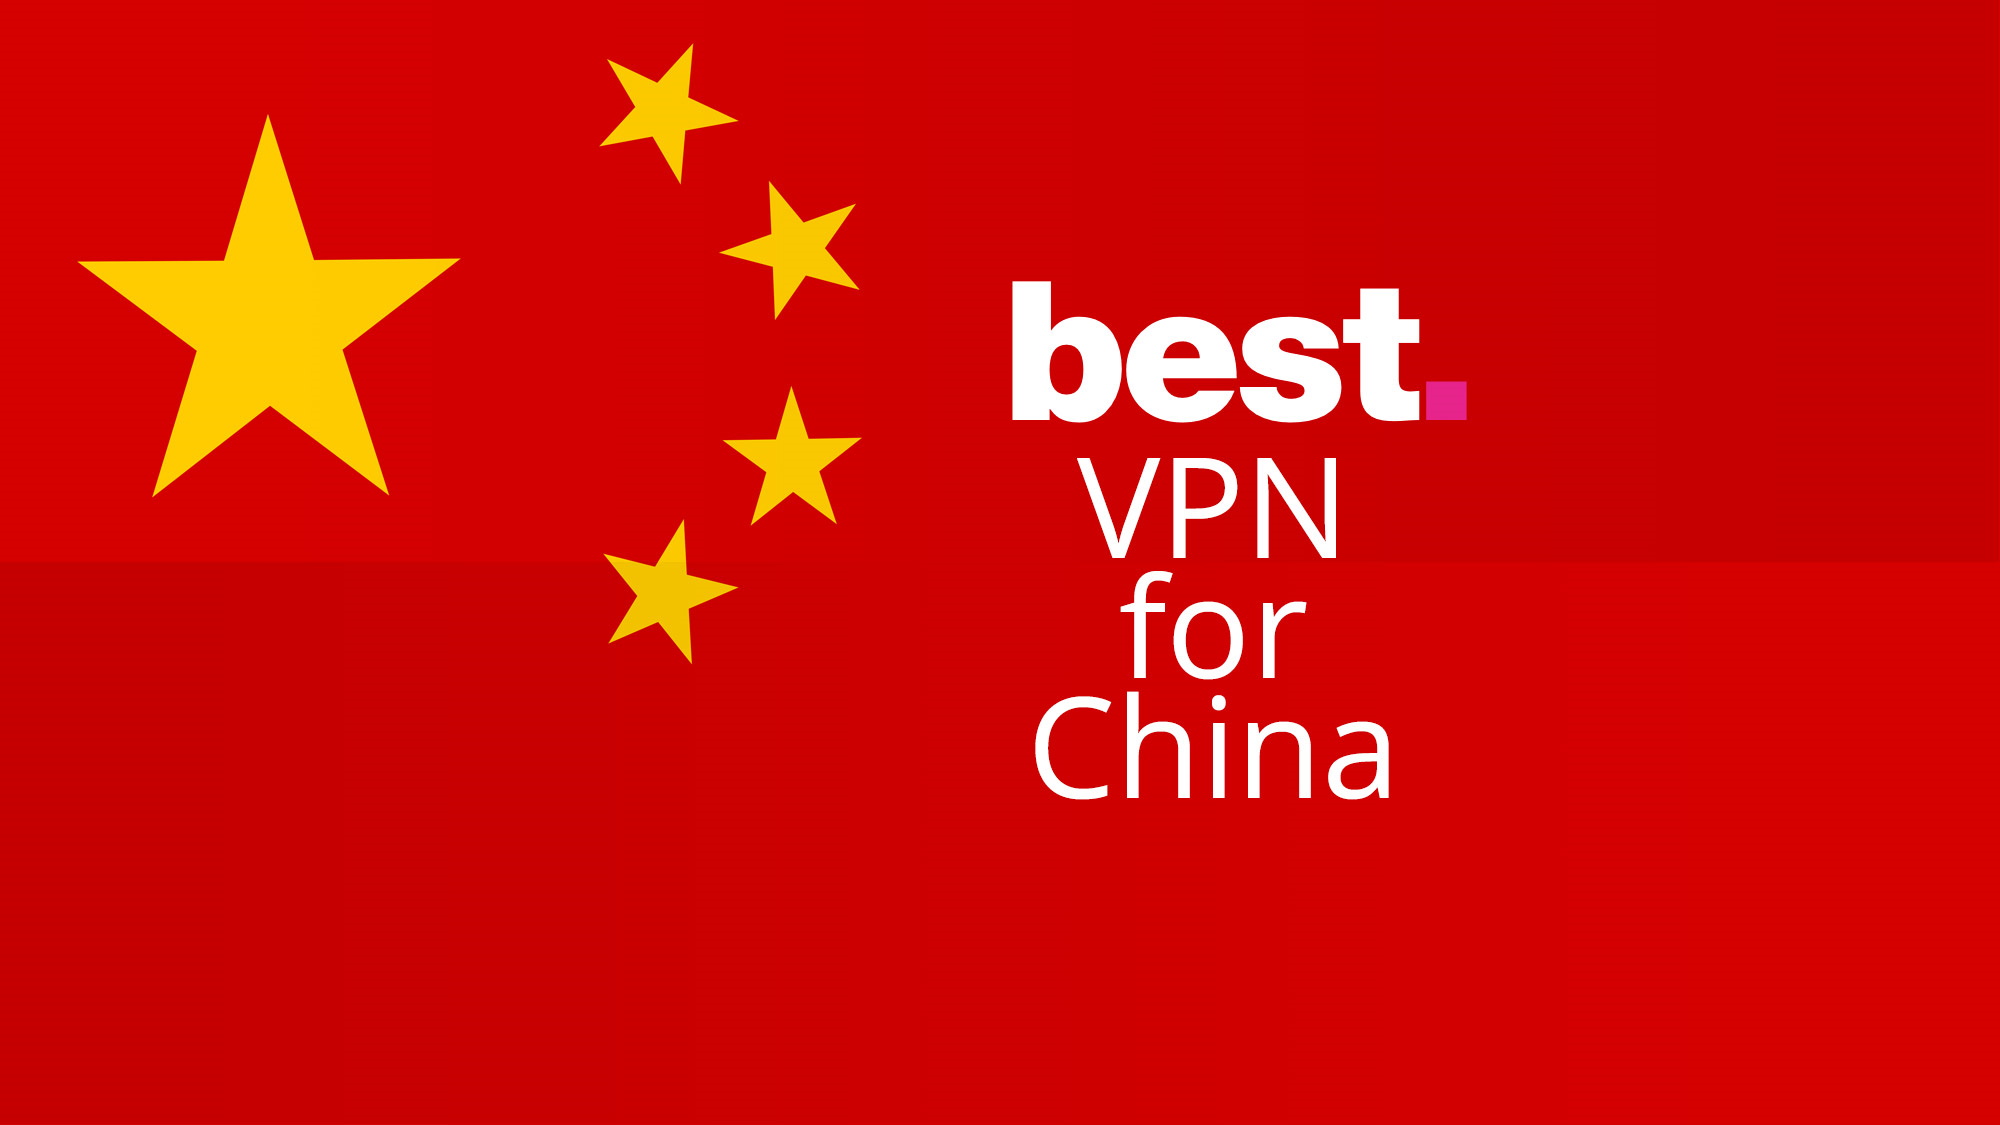 onhax vpn for china